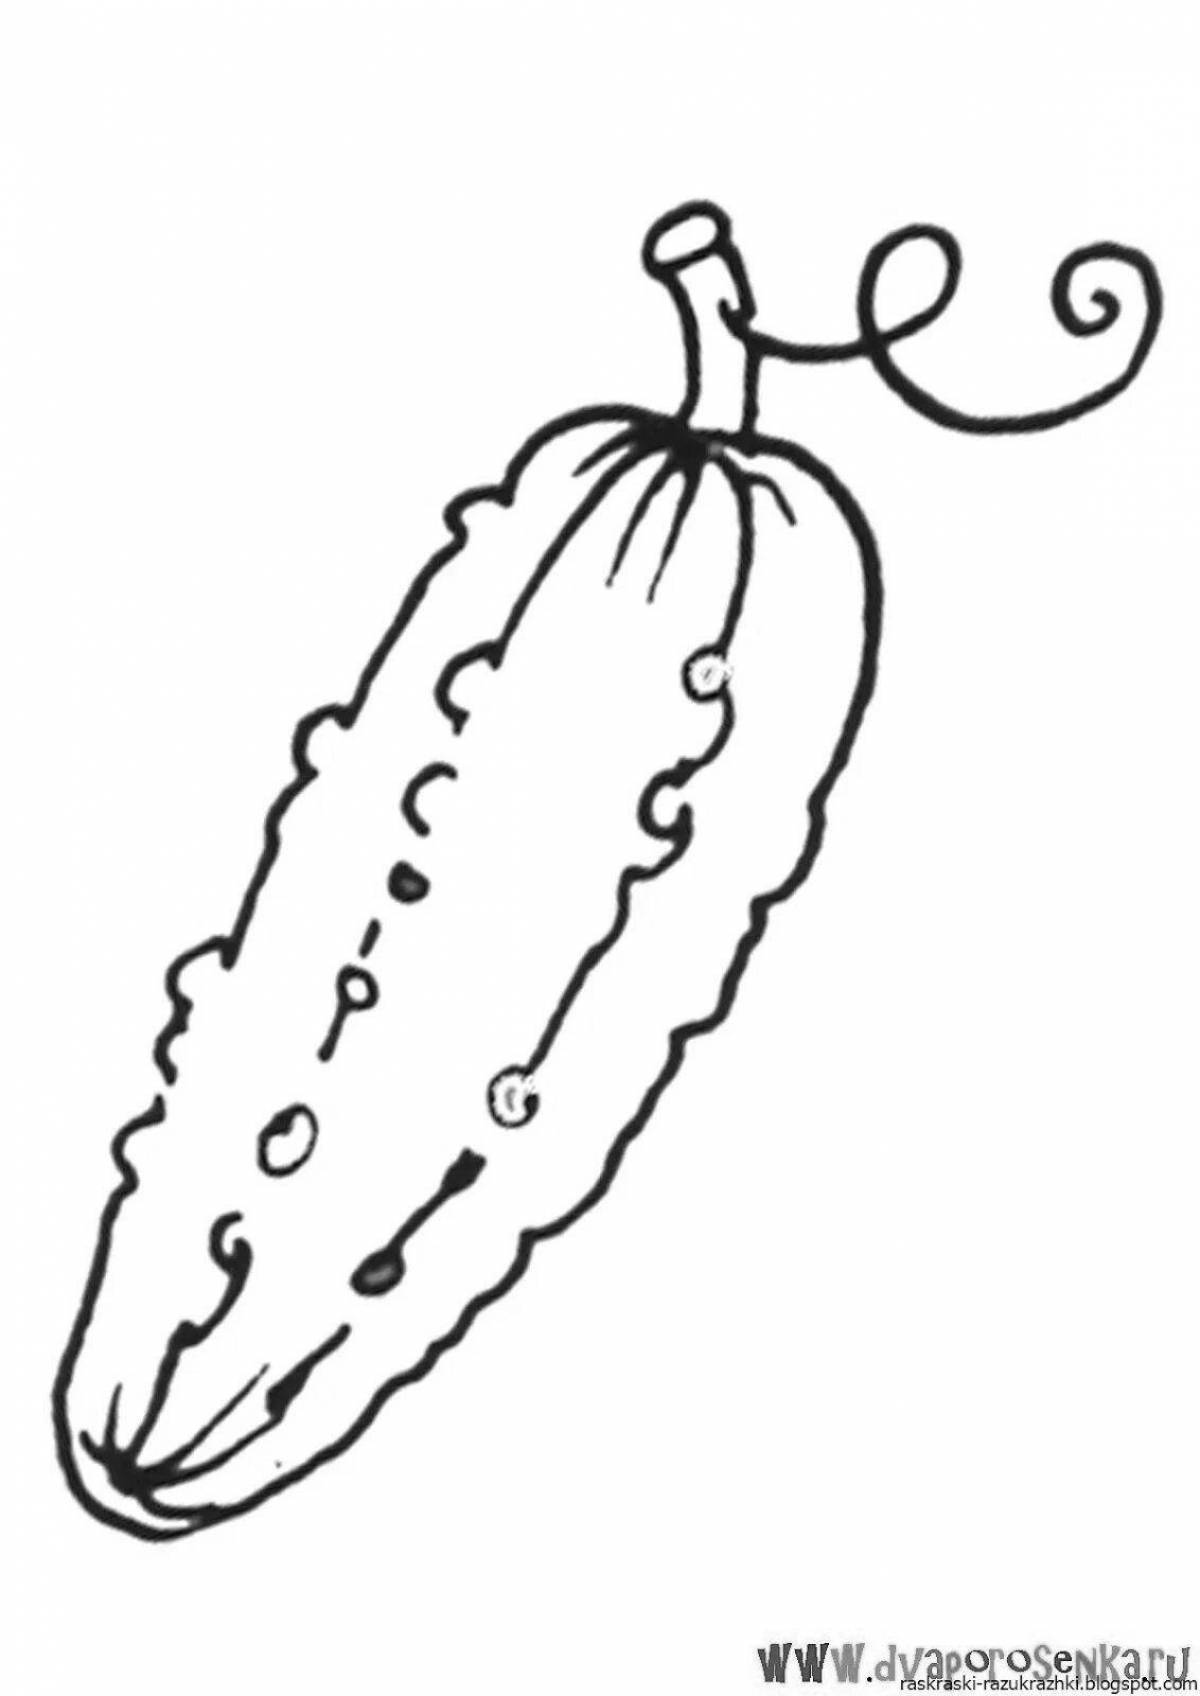 Great cucumber and tomato coloring book for little ones